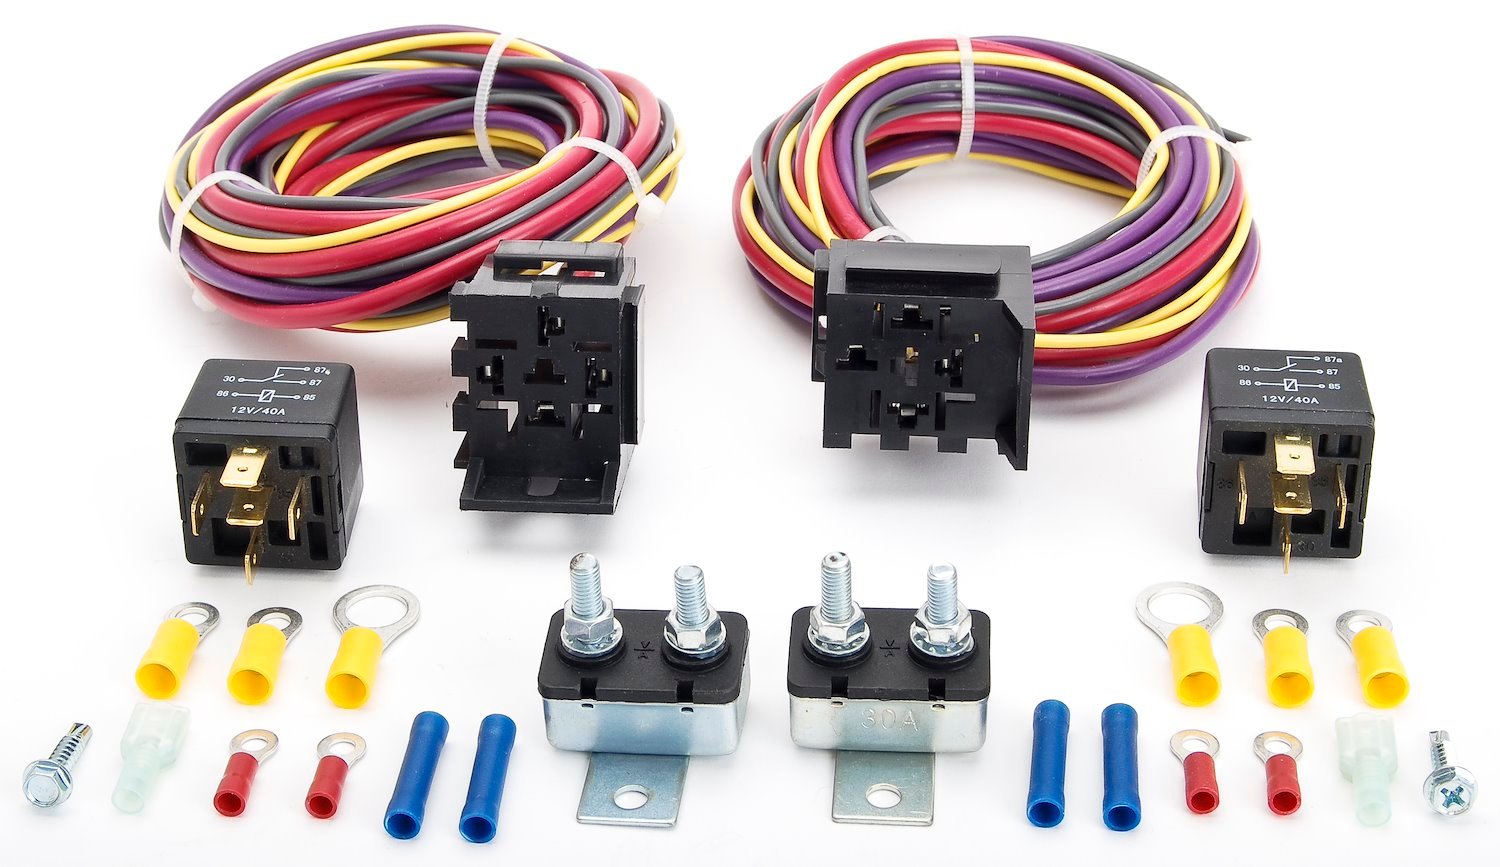 Manual-Controlled Dual Fan Wiring Harness and Relay Kit